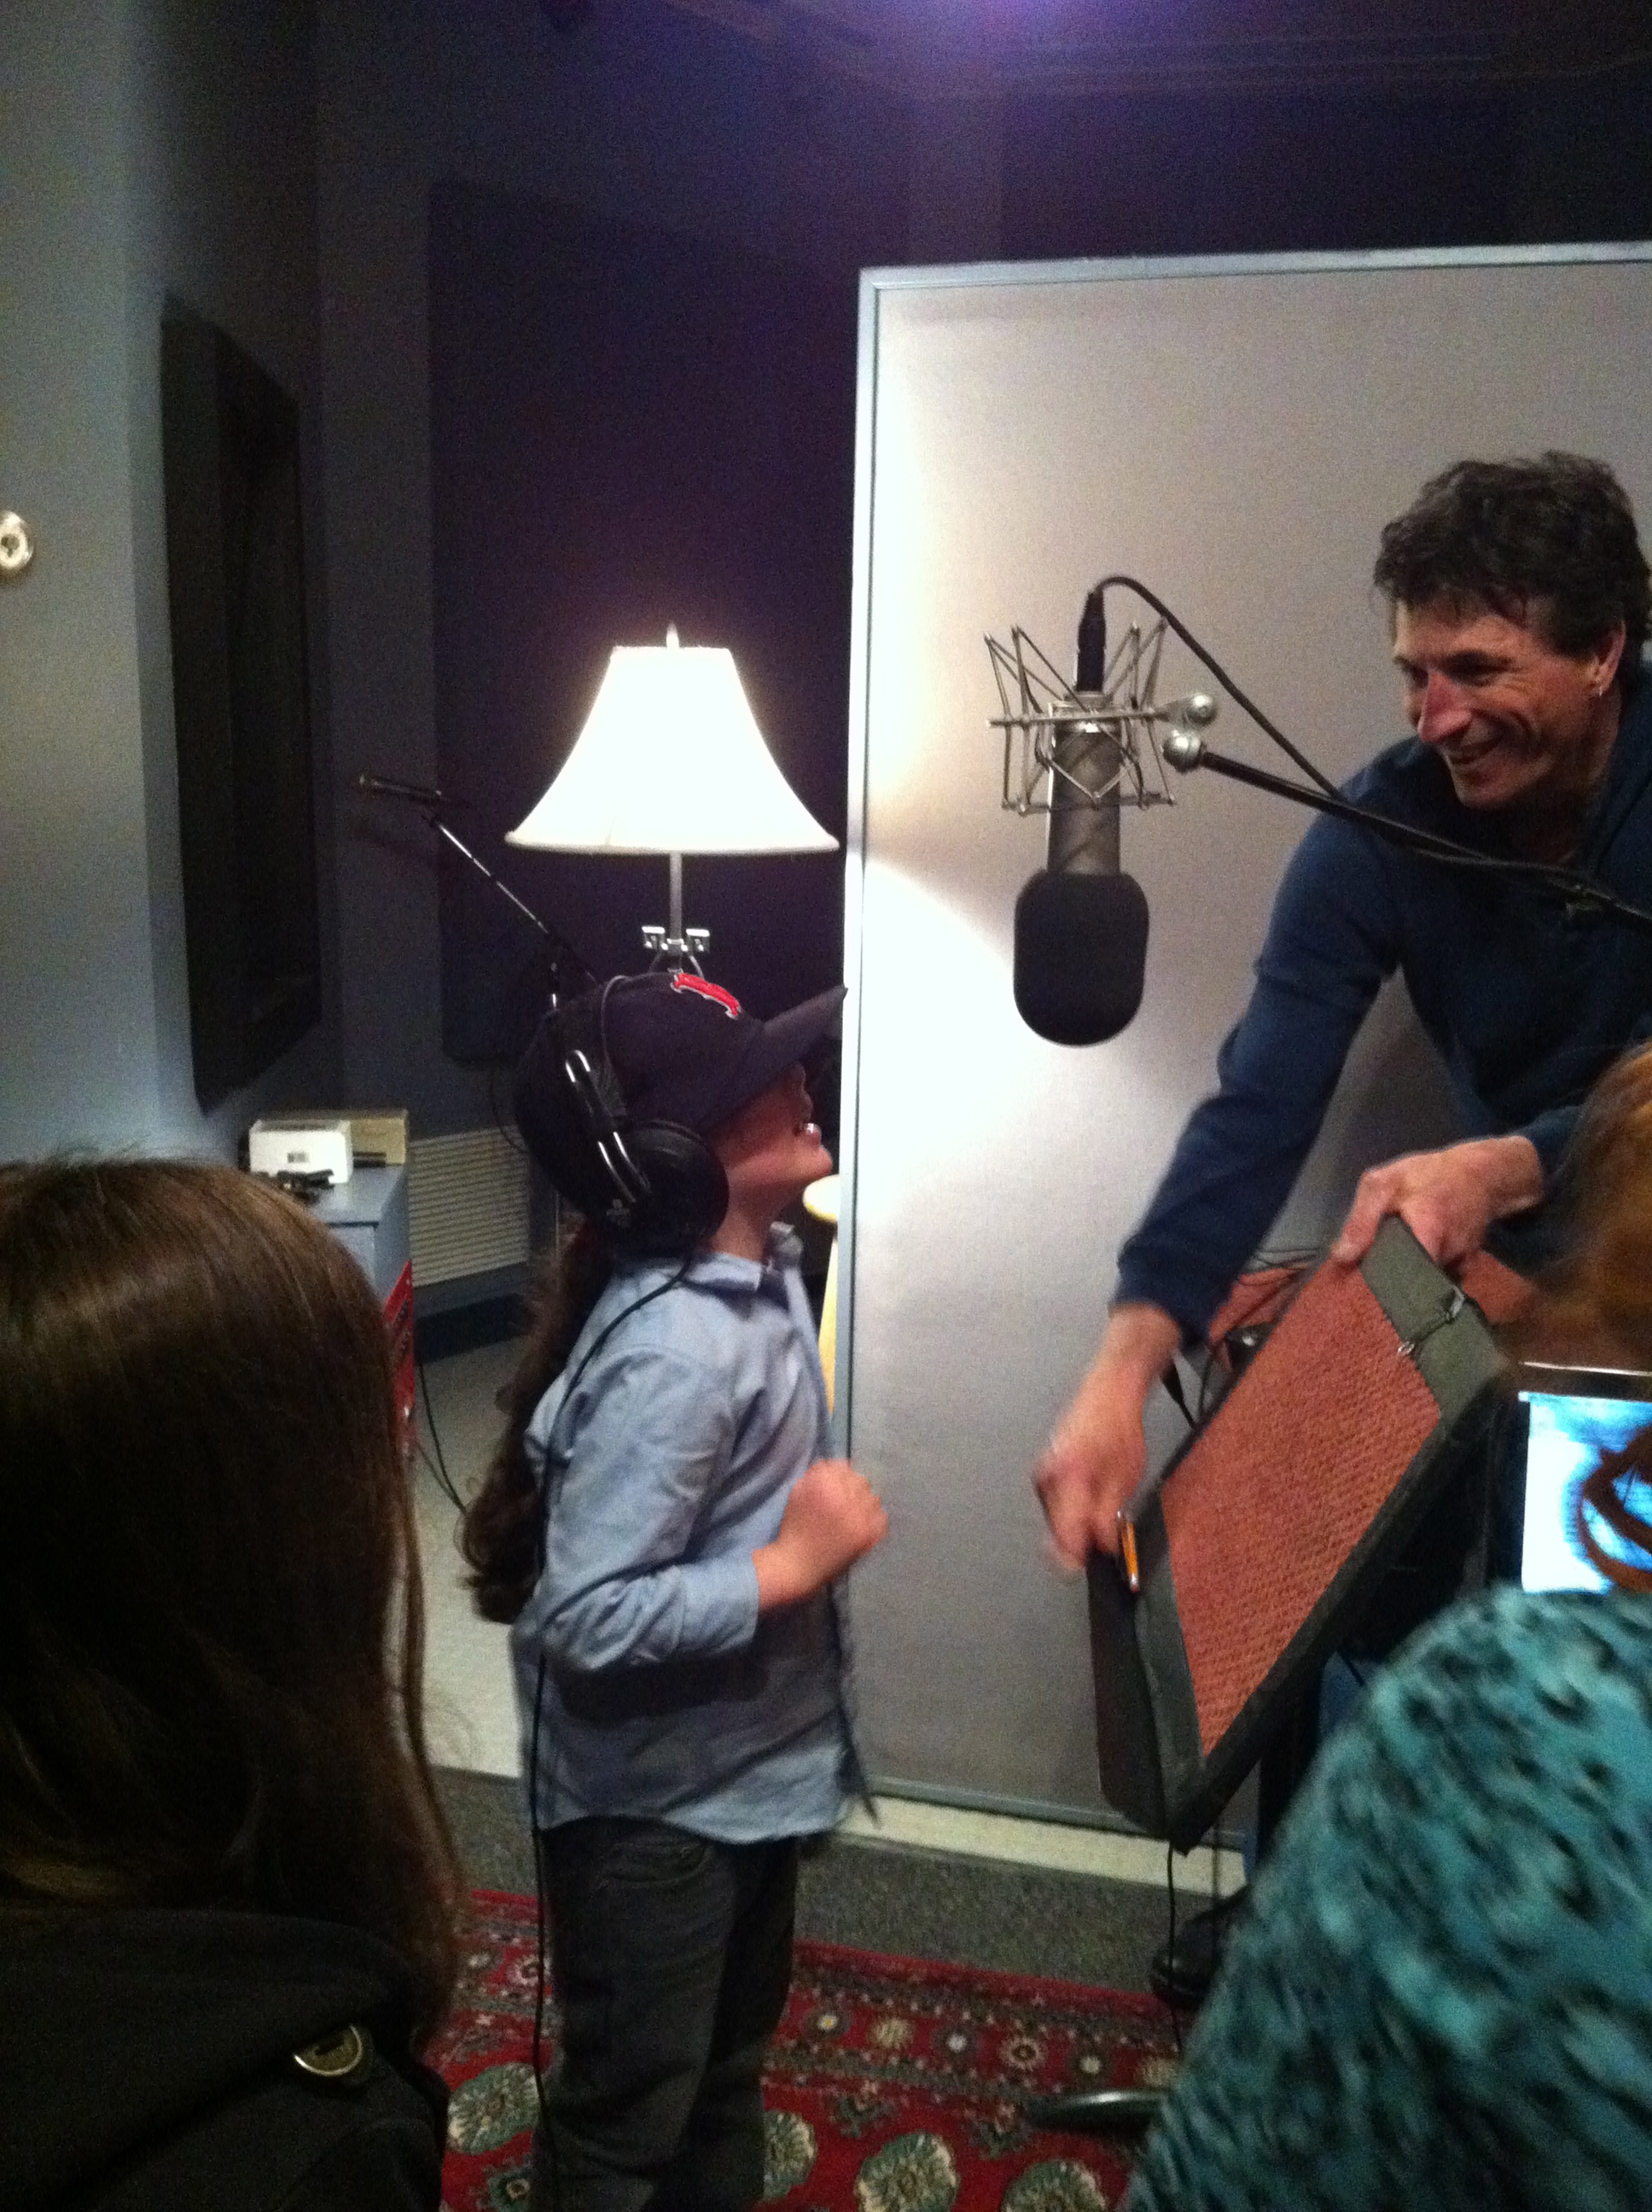 Katie at mix one studios in Boston doing some voice over work.